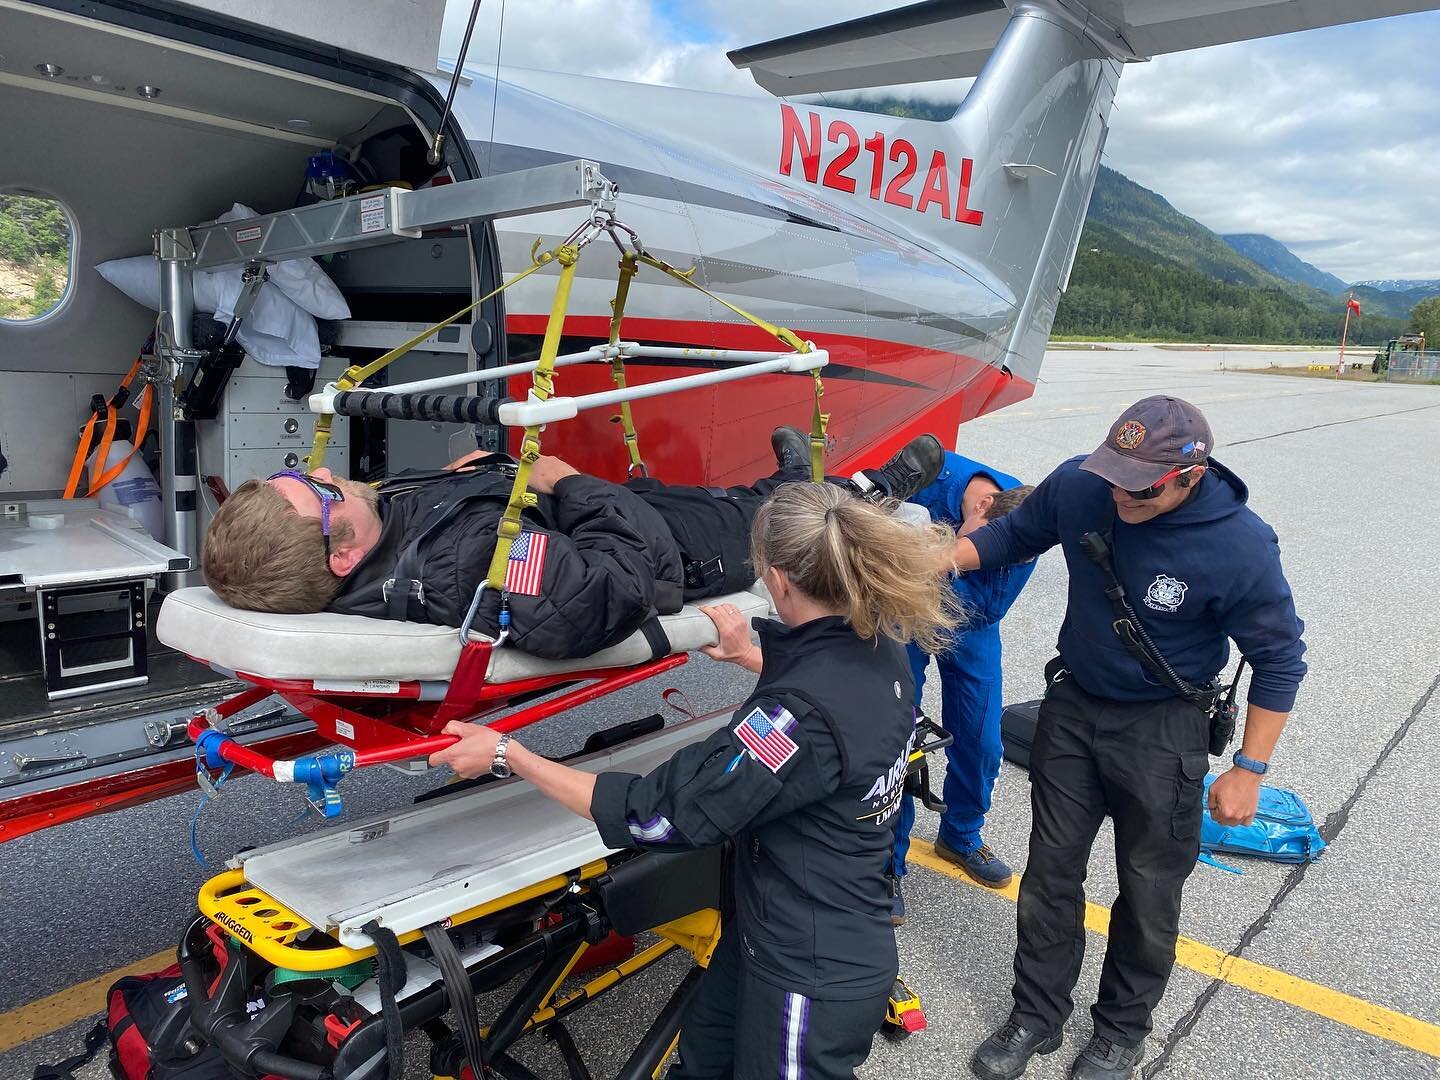 Our friends from @airliftnw stopped by this afternoon to train on the aircraft with Skagway Fire Department and the Dahl Memorial Clinic crews, as well as a Q &amp; A session. 

#skagwayfiredept #skagwayfiredepartment #skagway #skagwayalaska #svfd #a